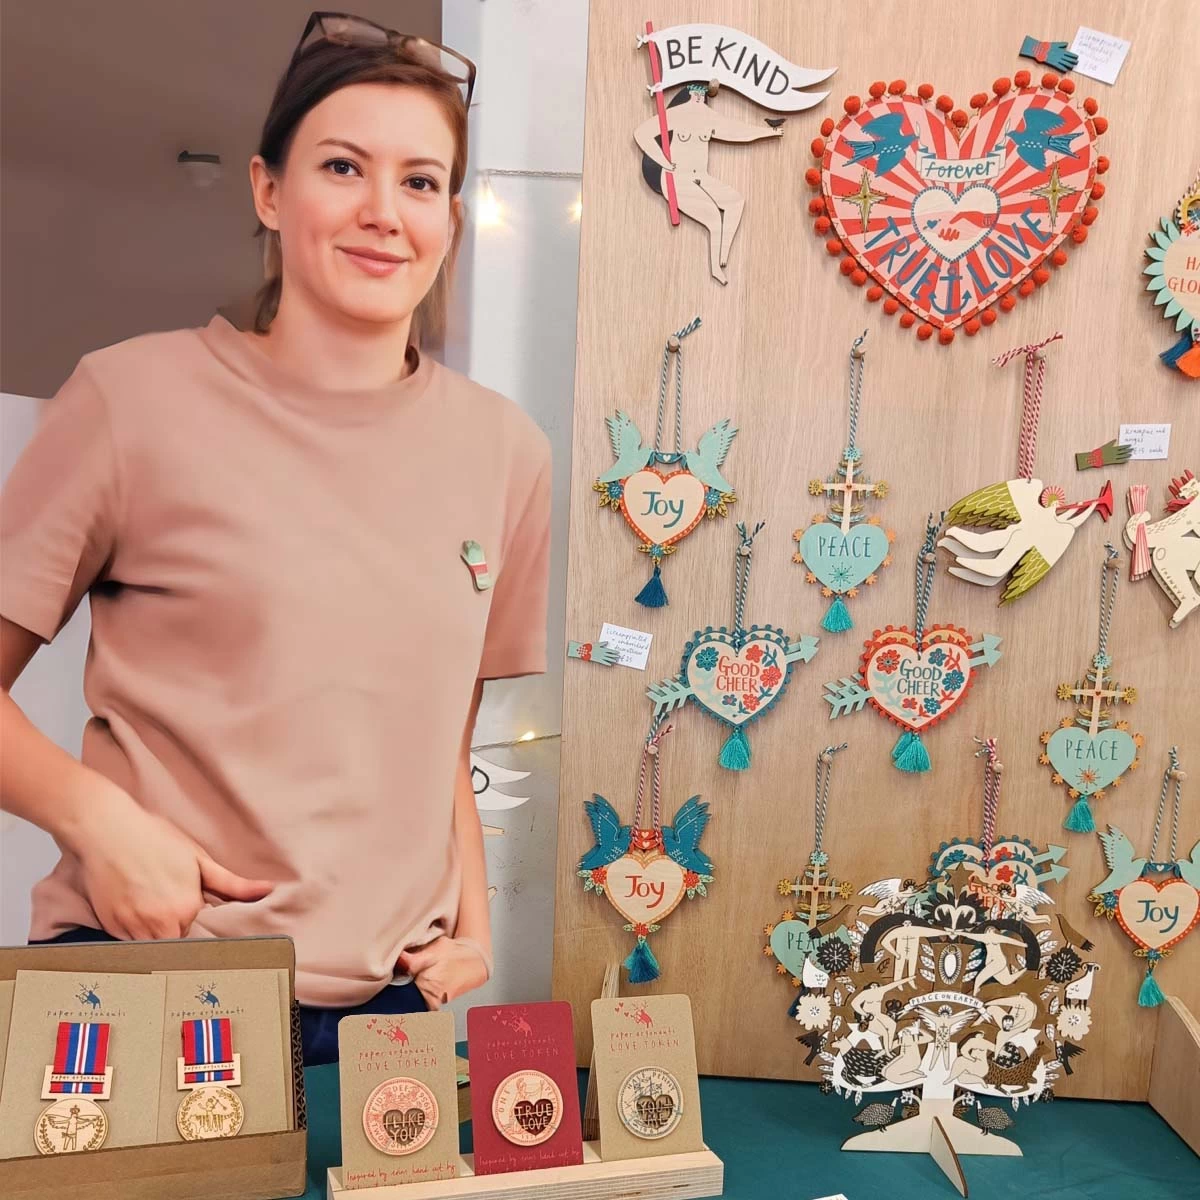 fiona biddington stands by her stall selling her colourful, joyful wooden screenprinted gifts